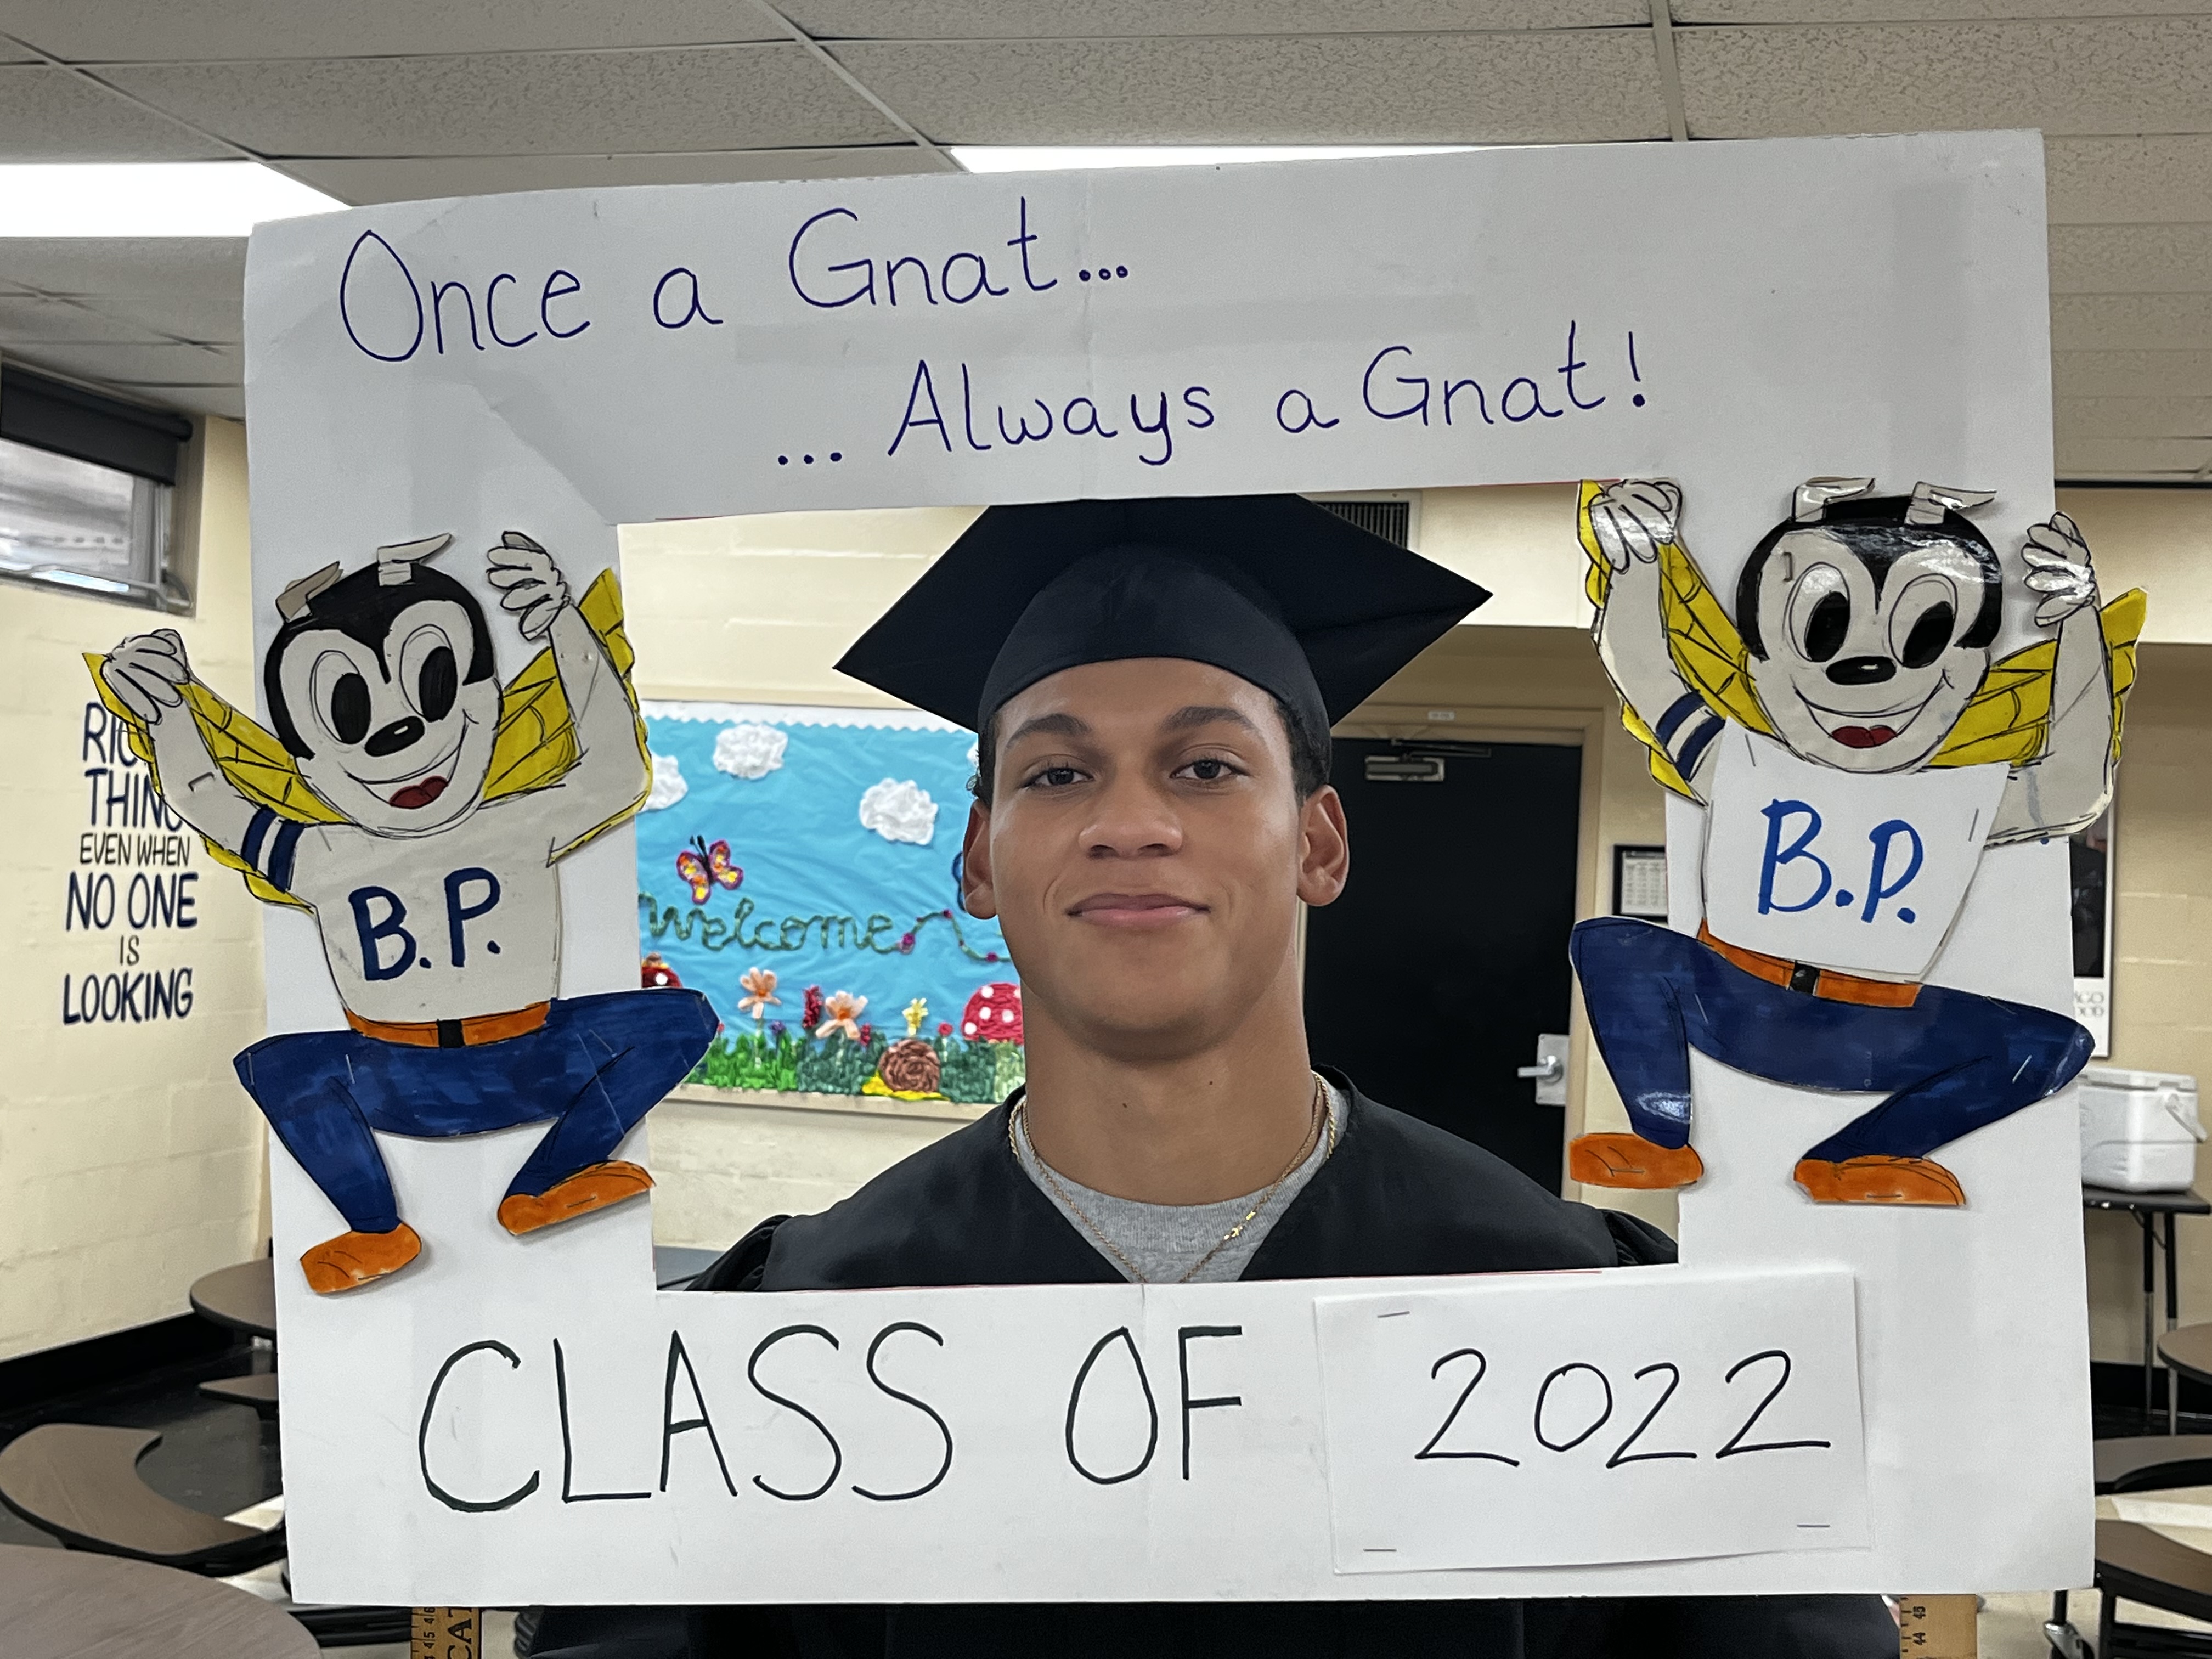 Class of 2022, Once a Gnat, Always a Gnat! 